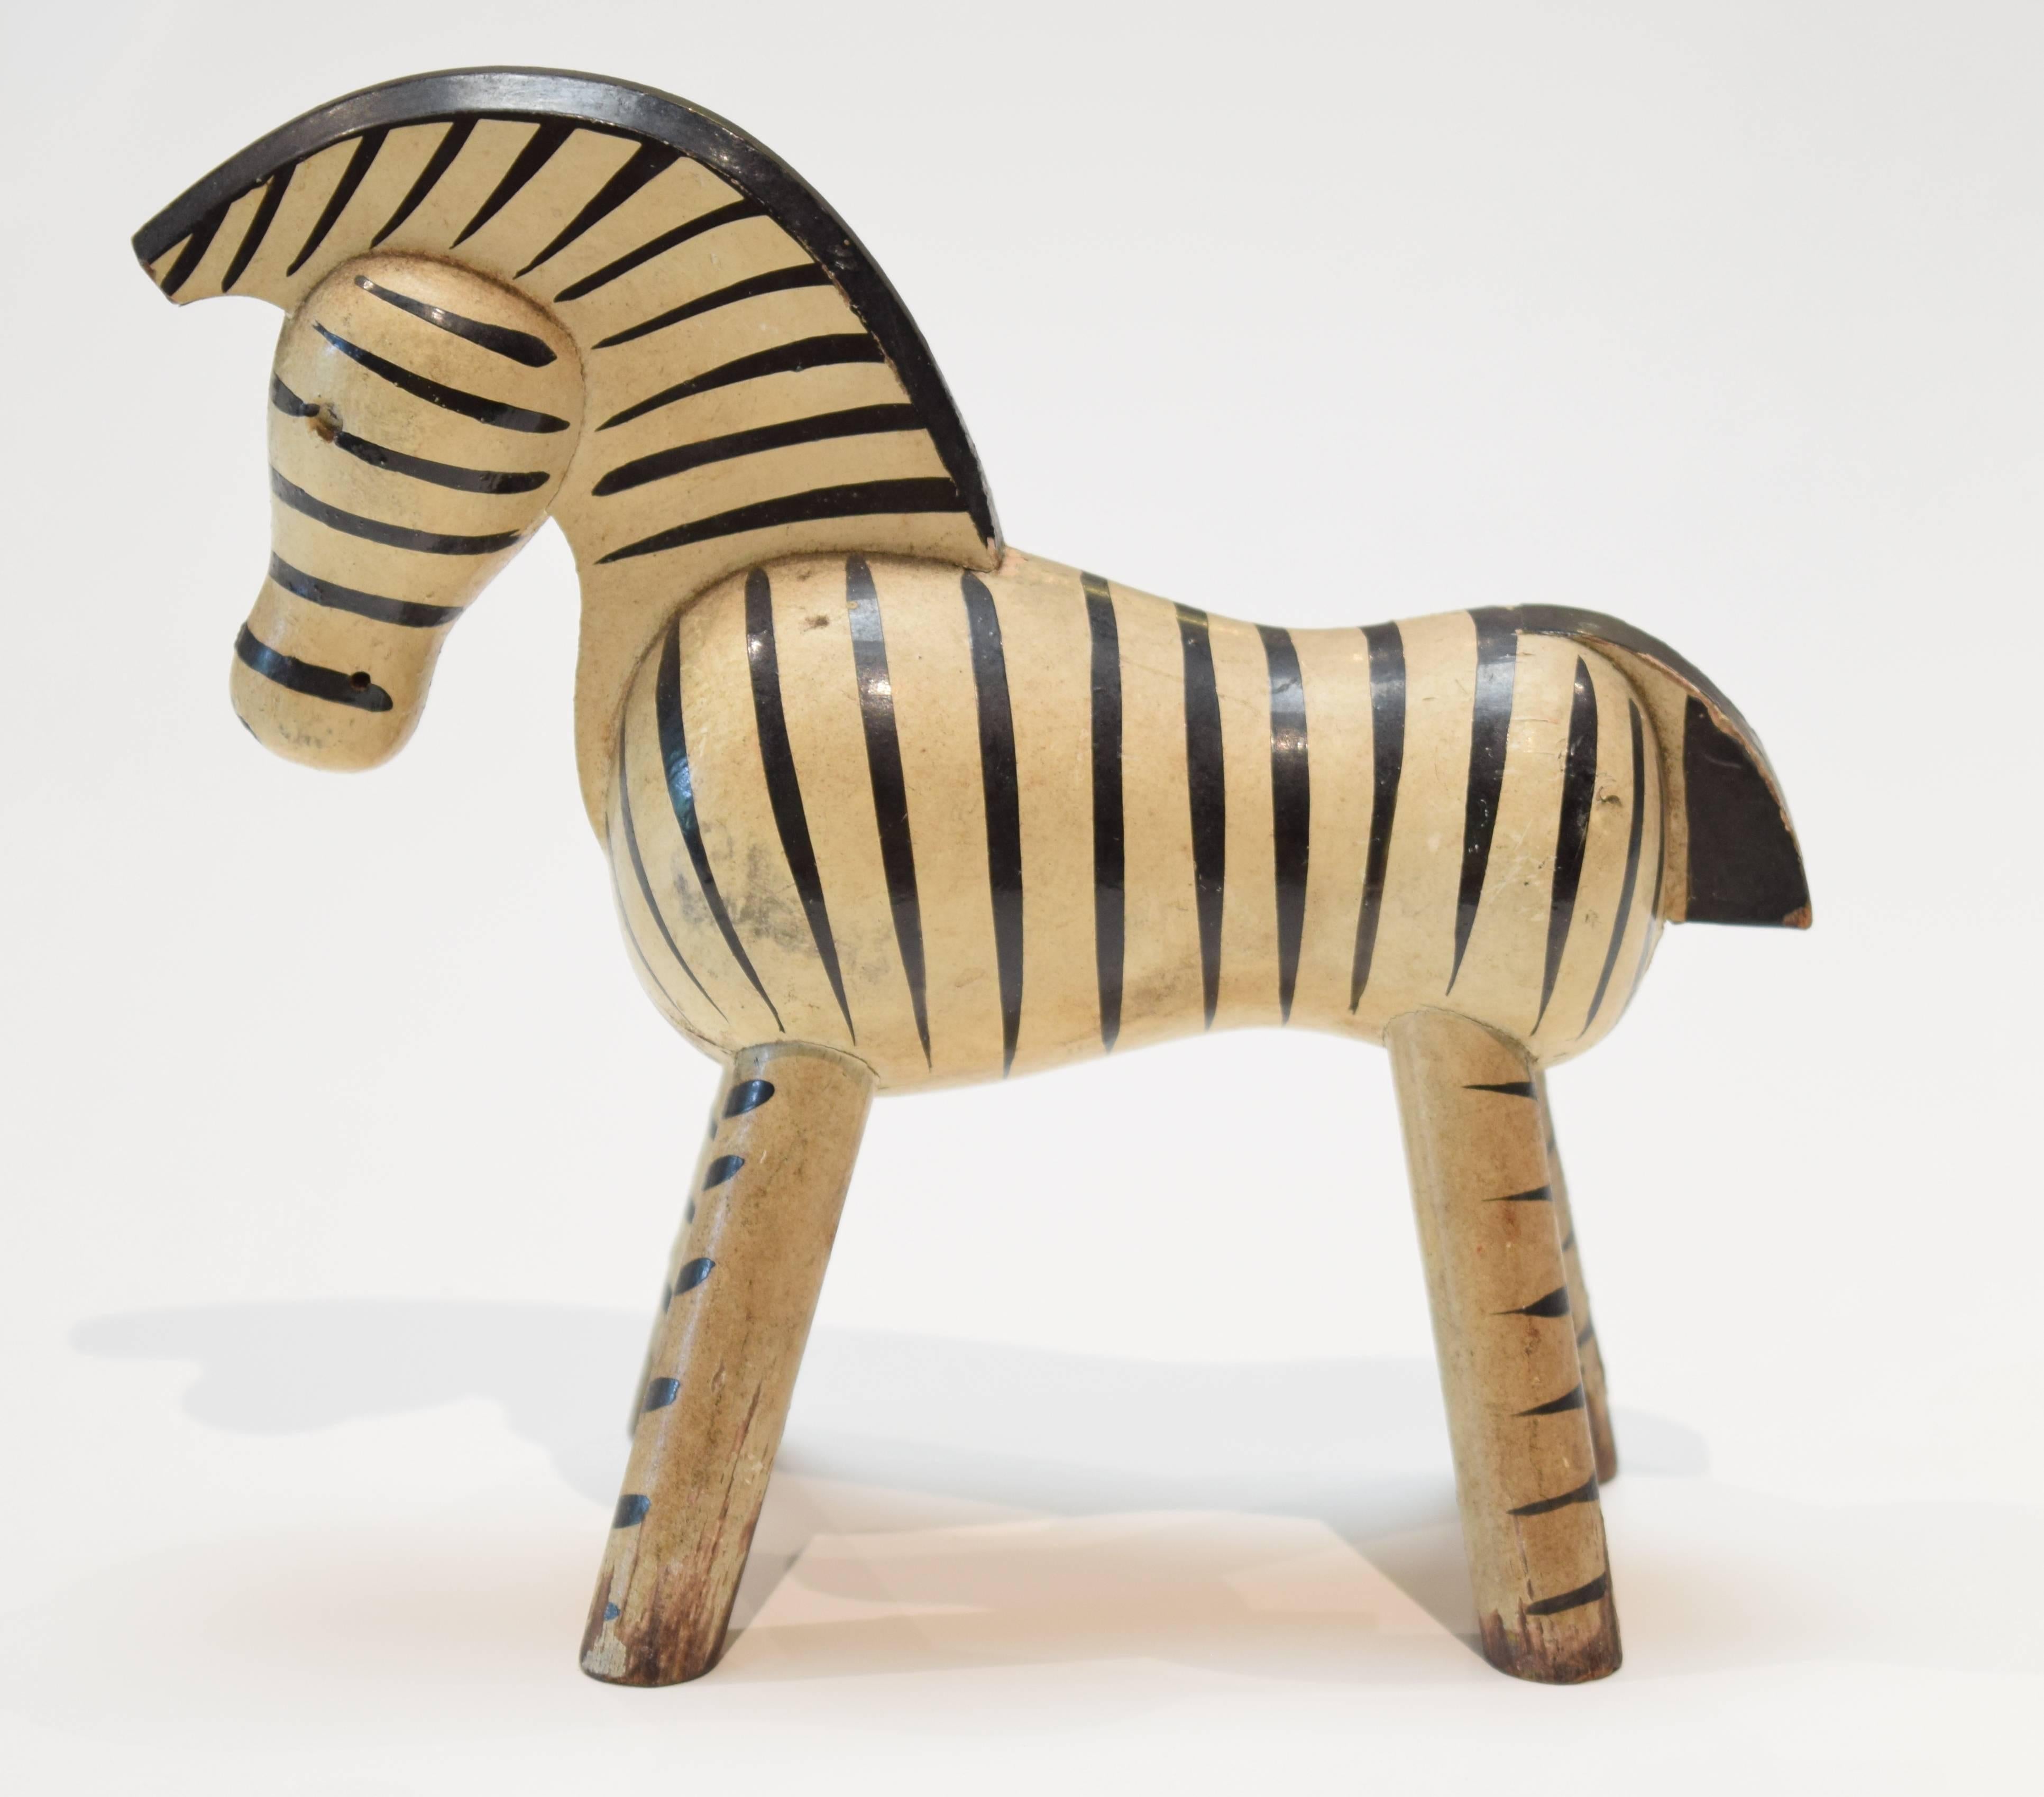 Store closing-- last day is 7/31. Offers welcome! Beautiful handcrafted wooden zebra by Kay Bojesen. This appears to be an early example of the design, which was originally introduced in 1935.